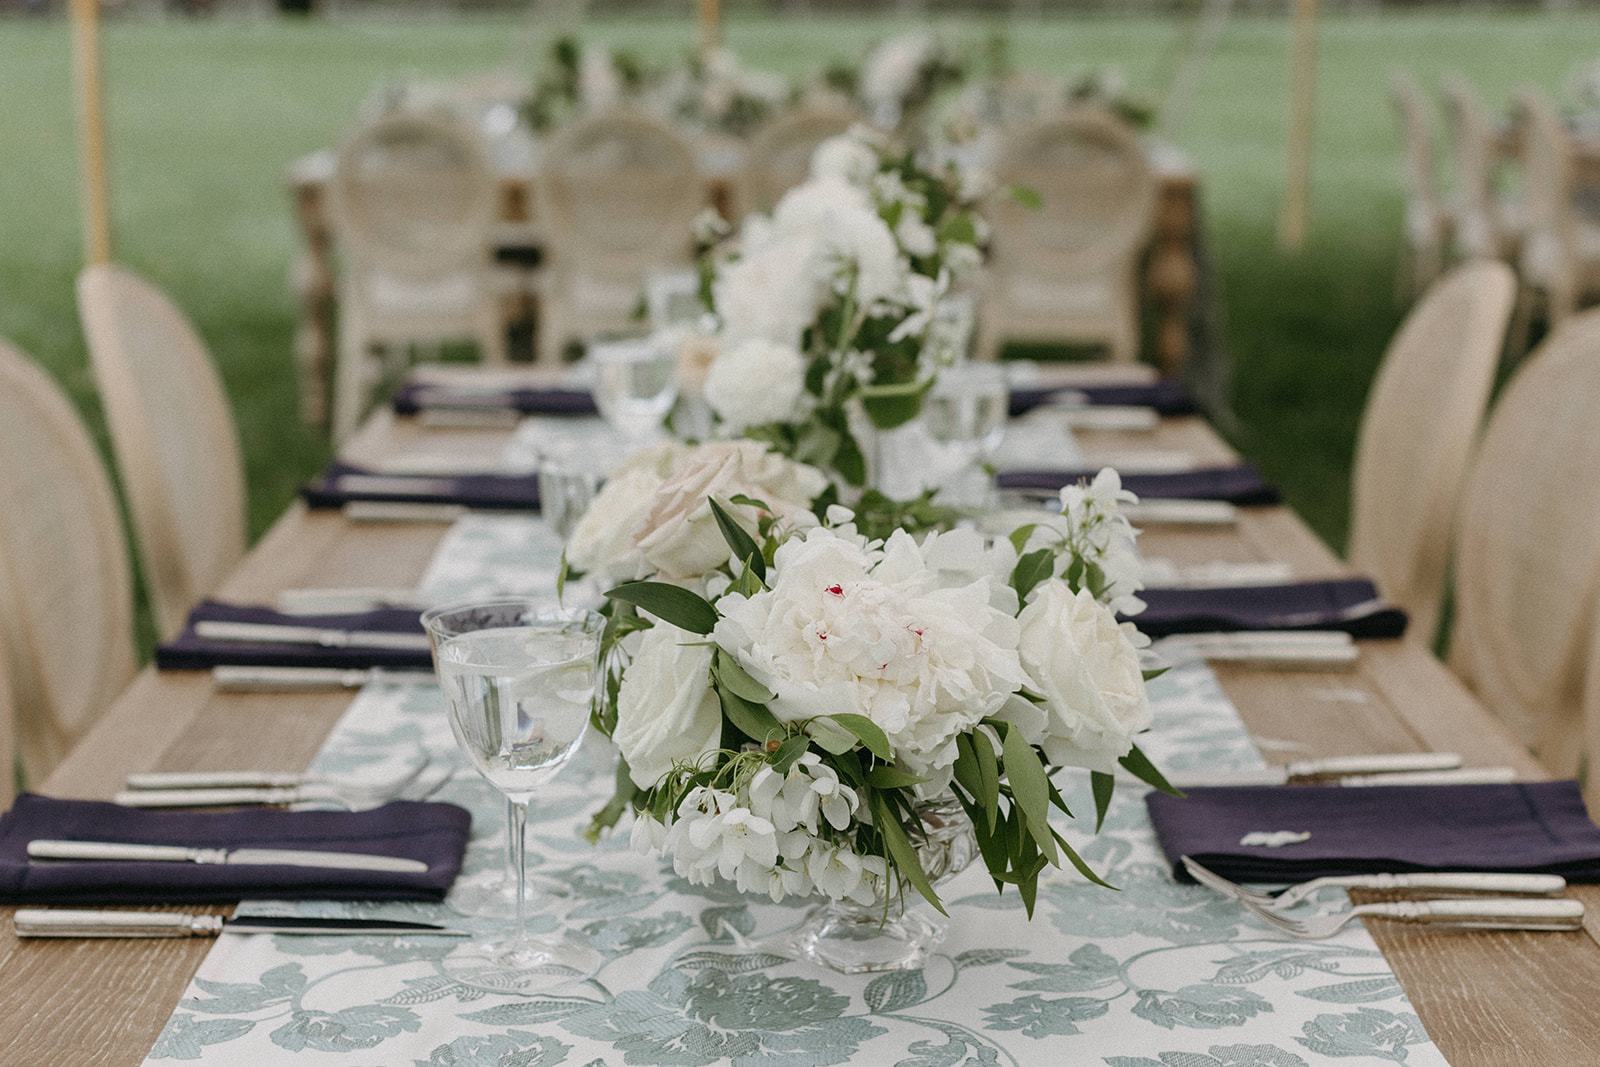 An elegant wedding reception tablescape with white rose centerpieces accented with dark purple napkins.
